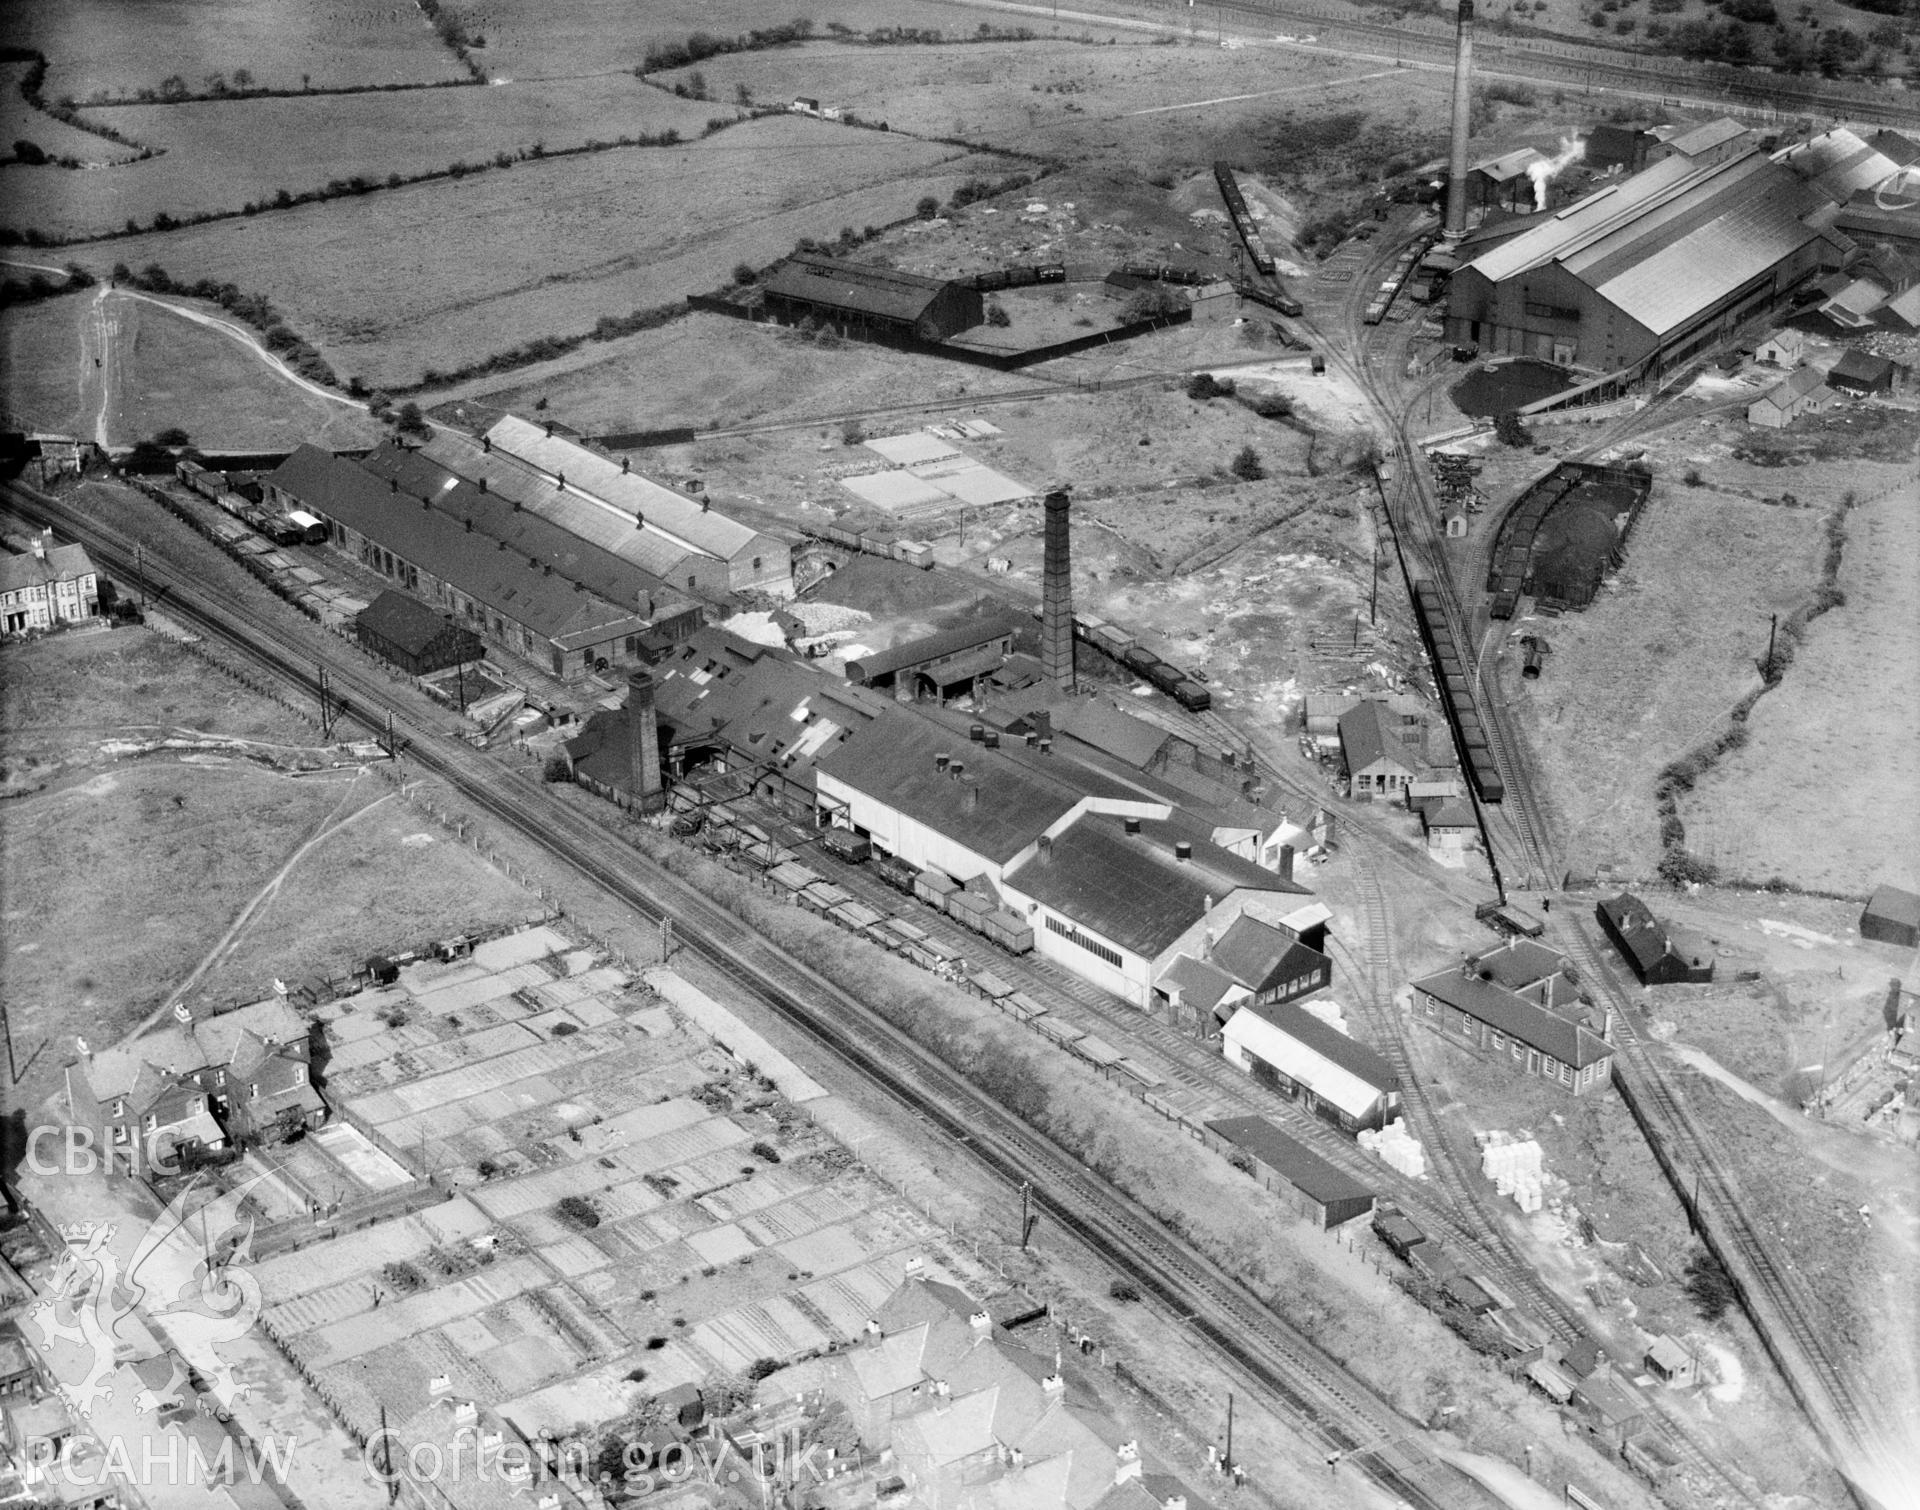 View of Redbrook Tinplate Co., Pontnewydd, oblique aerial view. 5?x4? black and white glass plate negative.